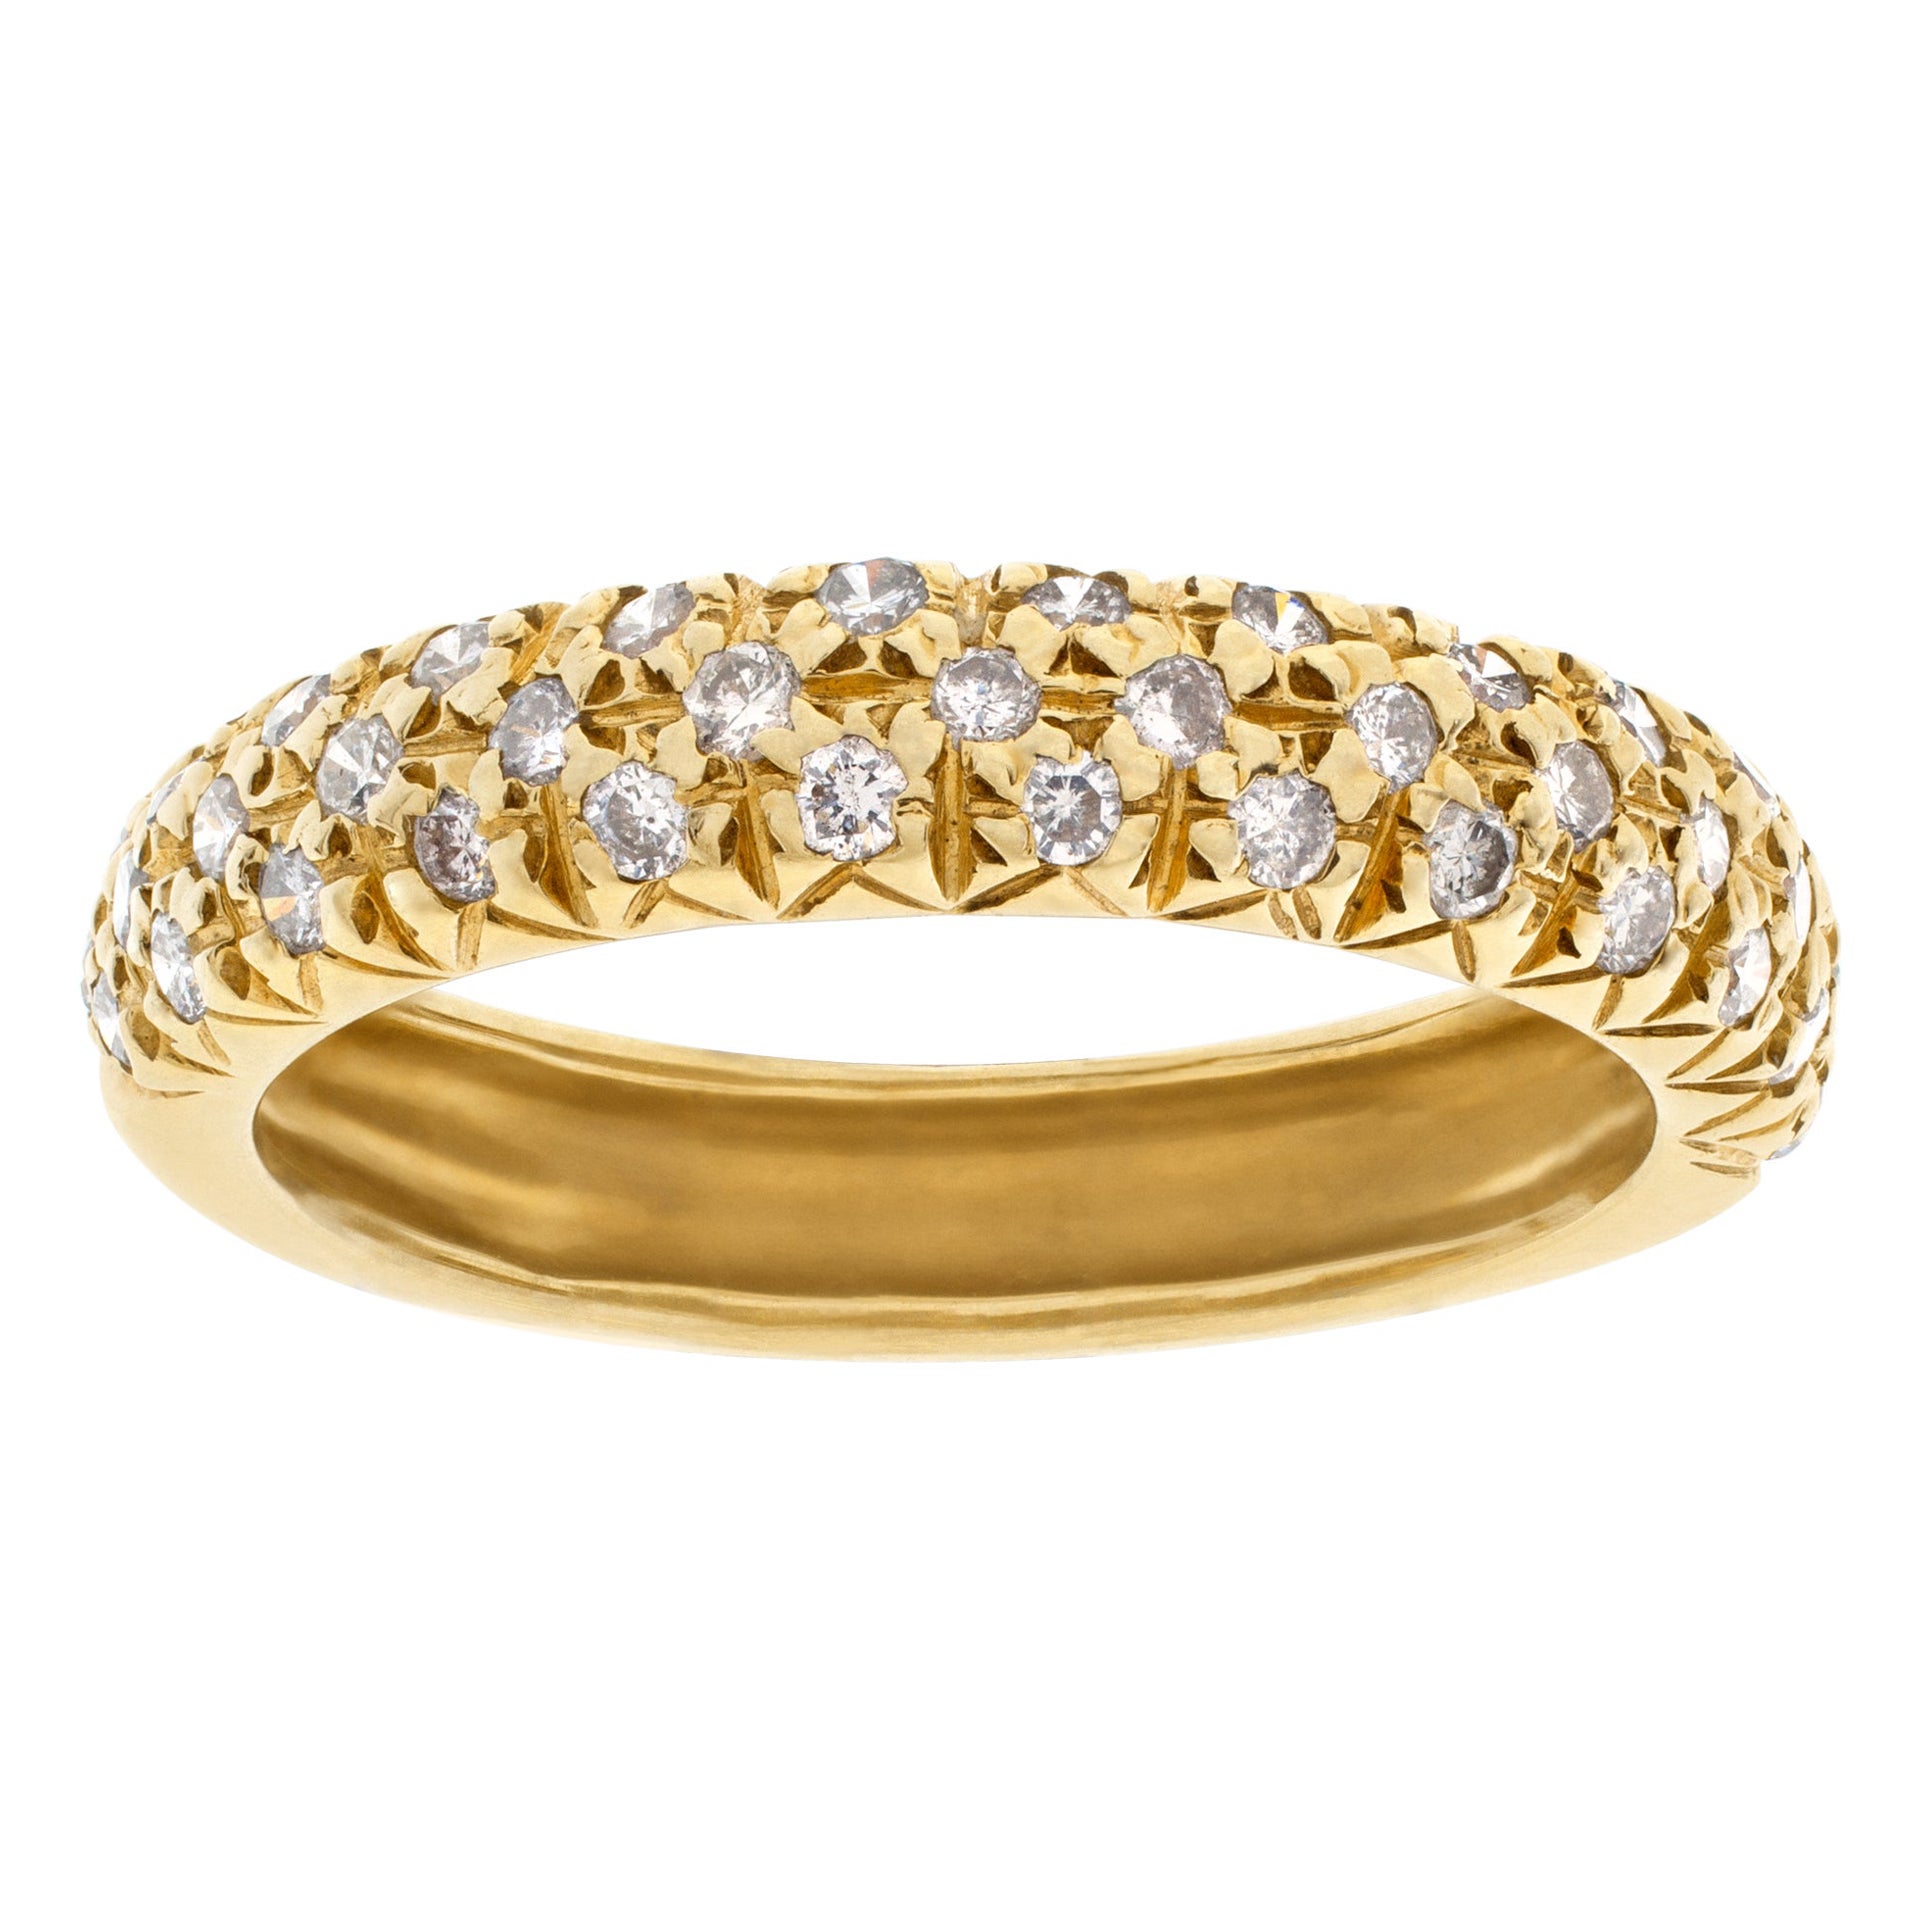 Pavé Diamond Band in 14k Yellow Gold. 0.80 Carats in Diamonds For Sale